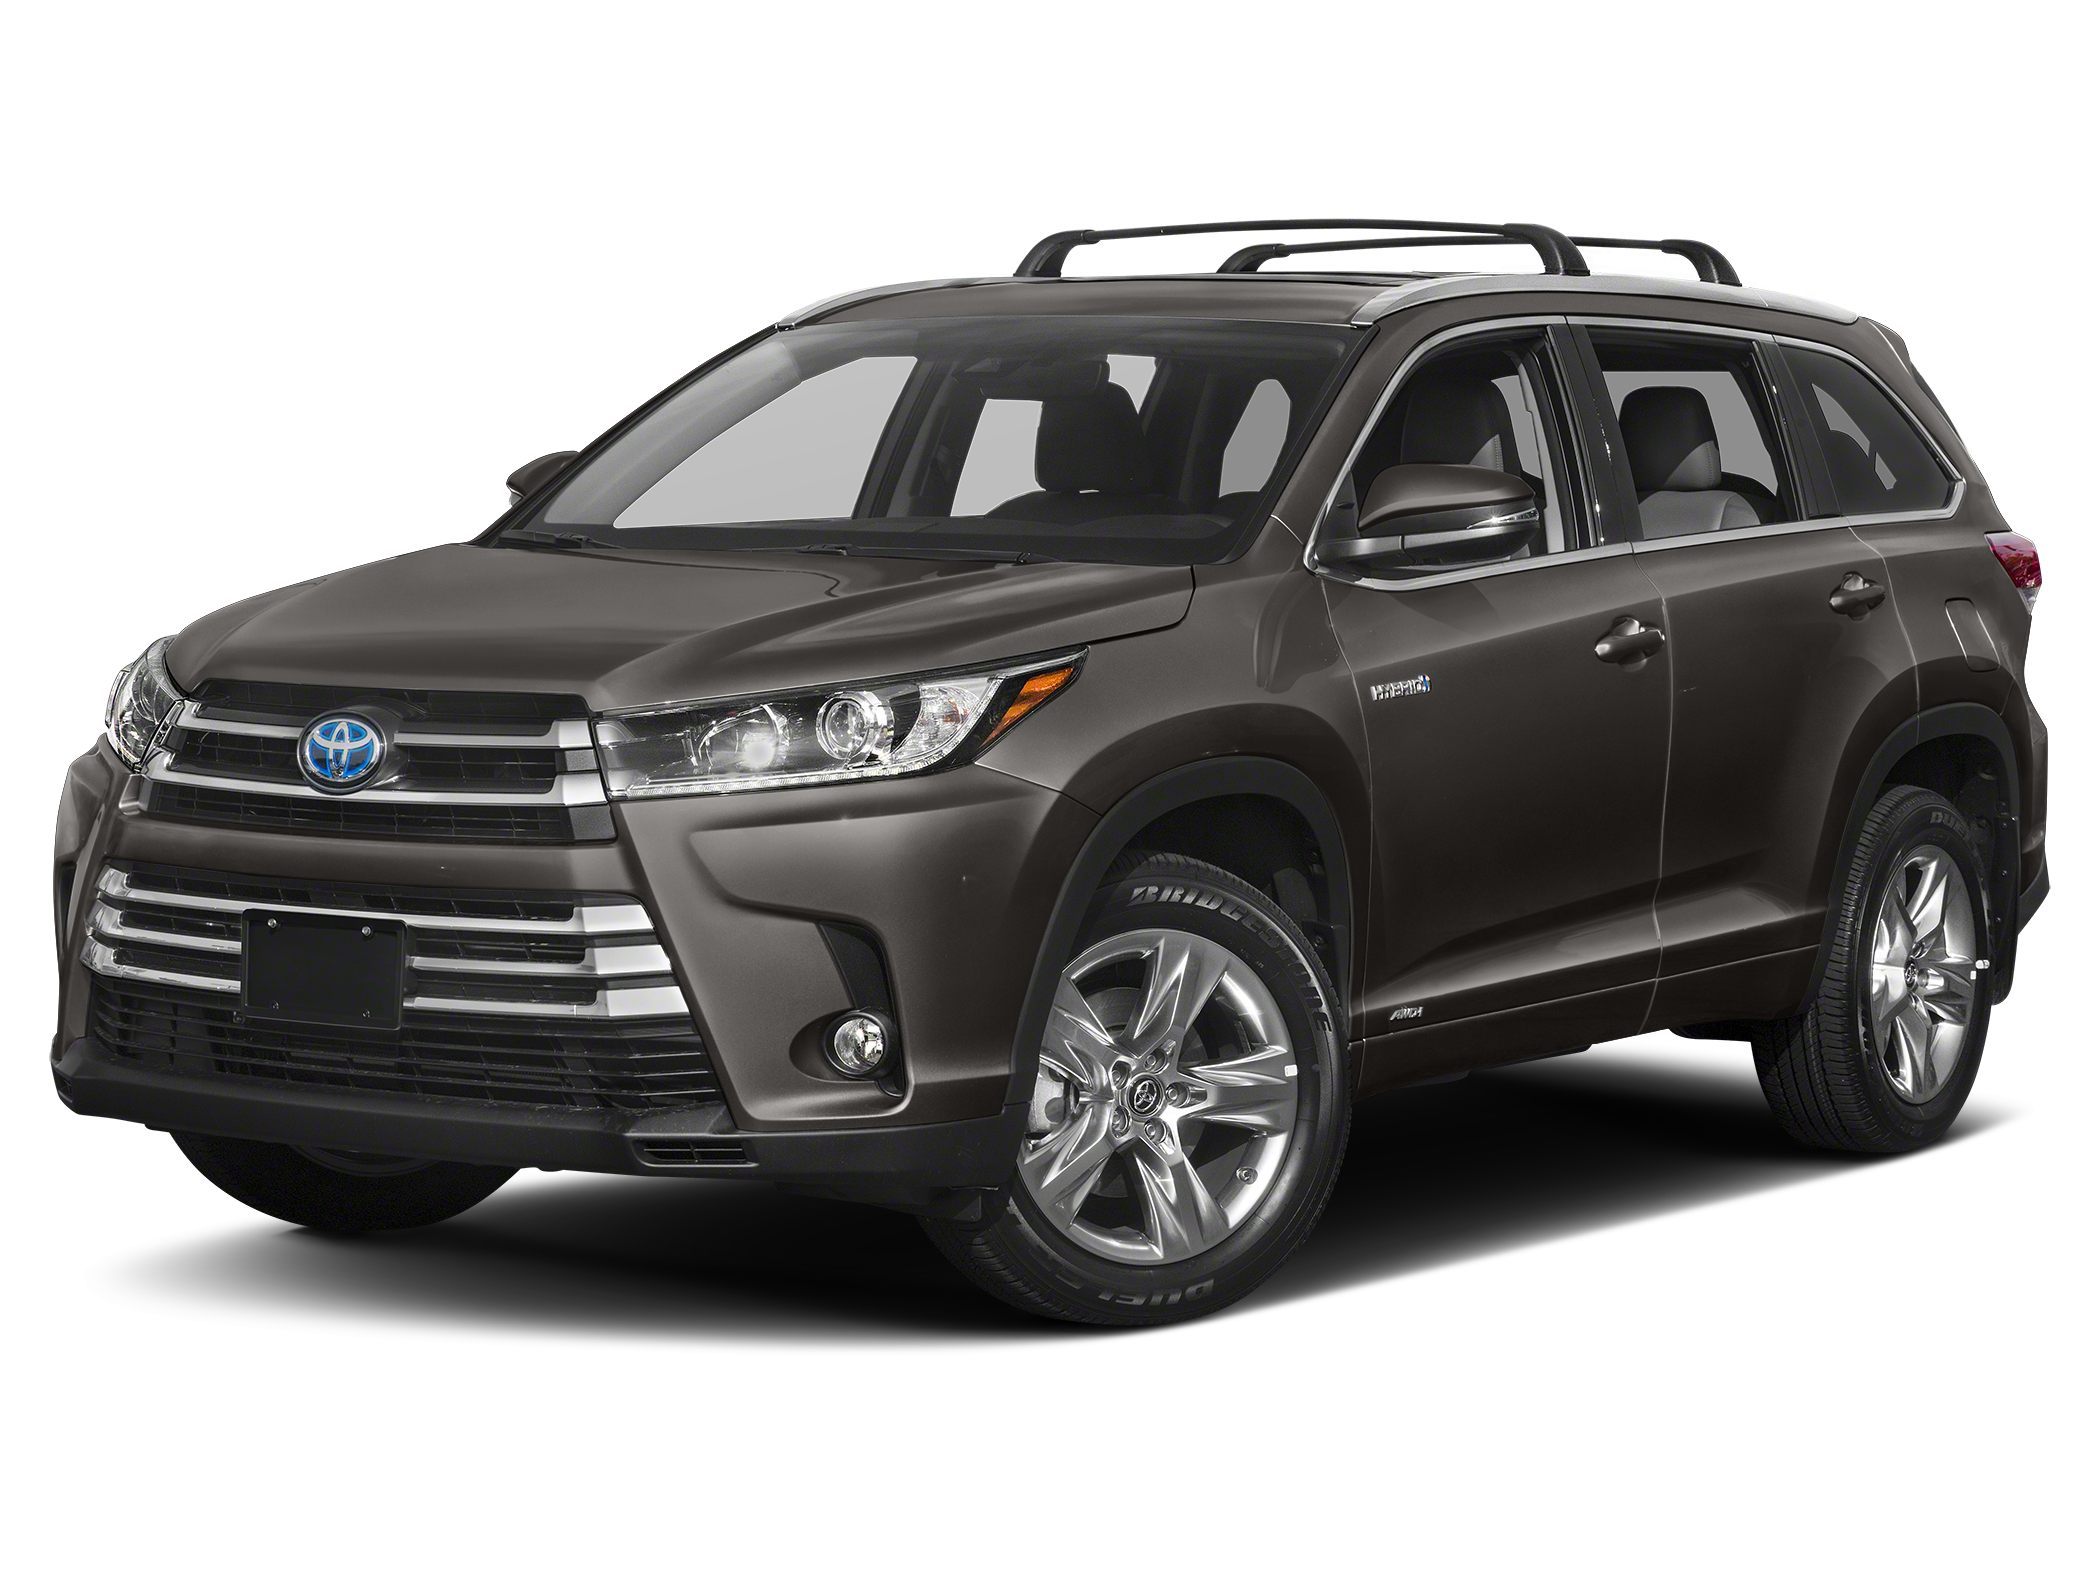 Used 2019 Toyota Highlander Hybrid Limited Platinum For Sale at Maplewood  Toyota serving the Minneapolis, MN area.